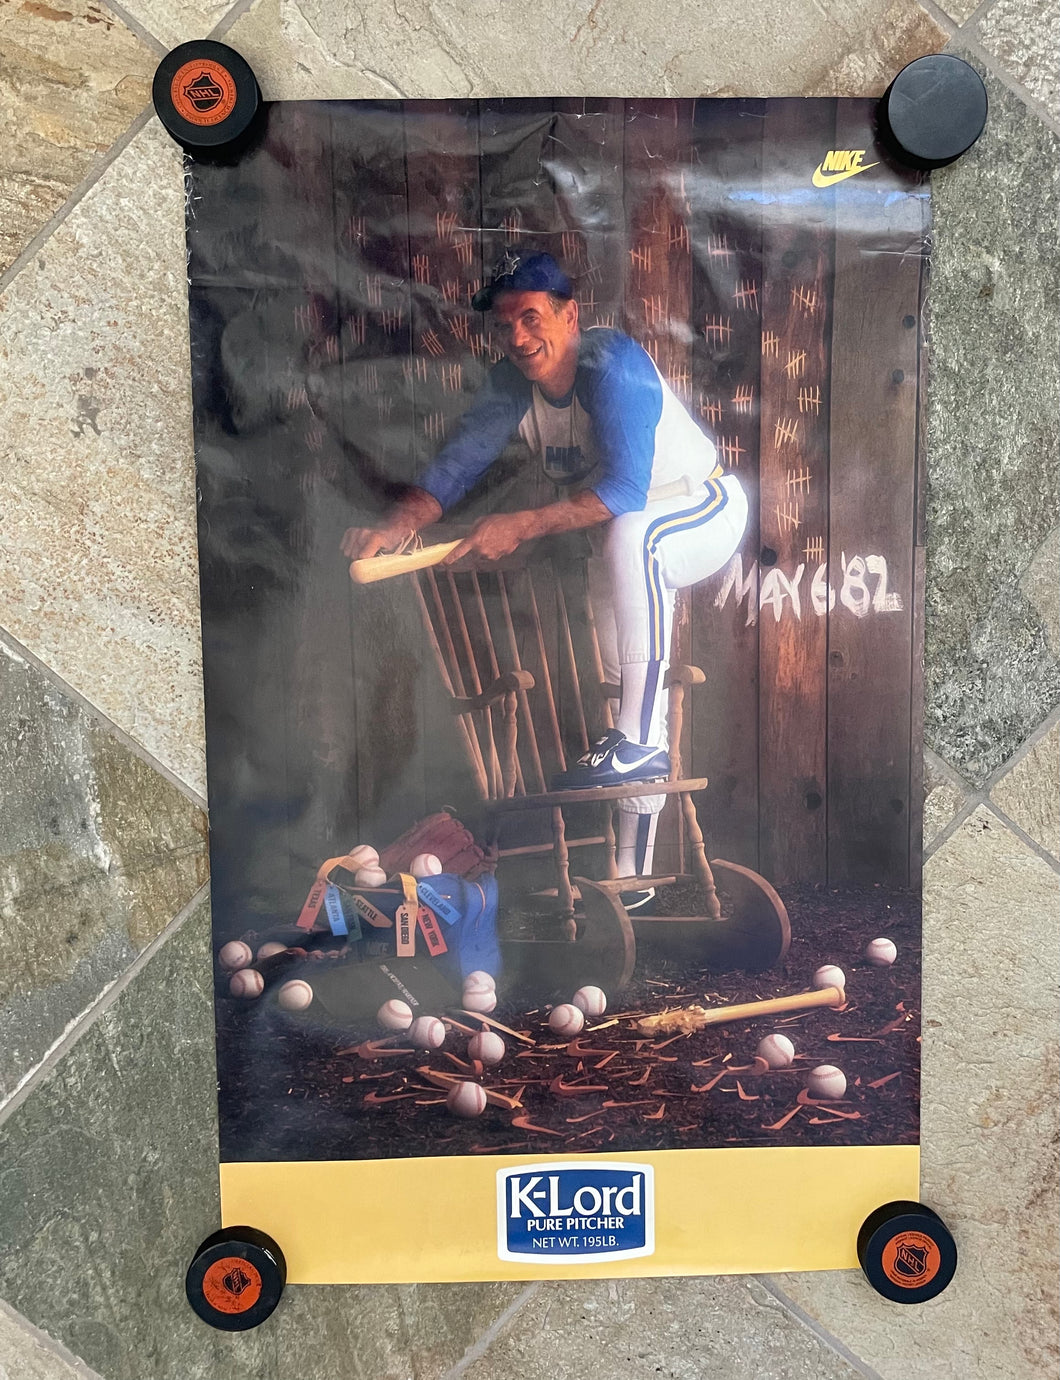 Vintage Seattle Mariners Gaylord K-Lord Perry Nike Baseball Poster ###